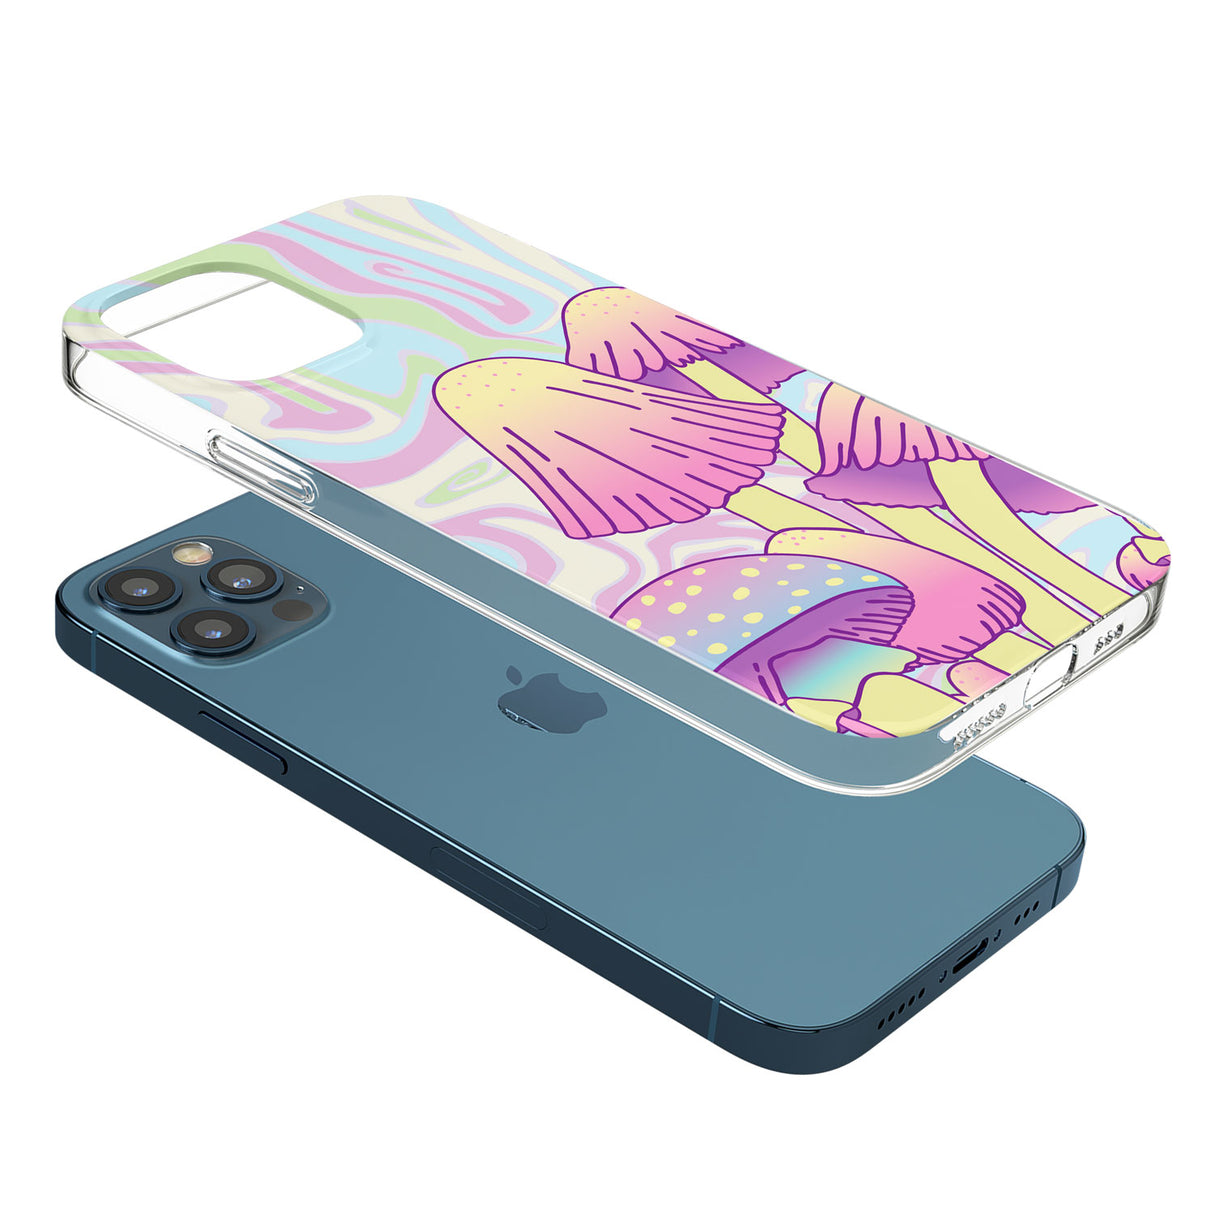 Shroomin' Phone Case for iPhone 12 Pro